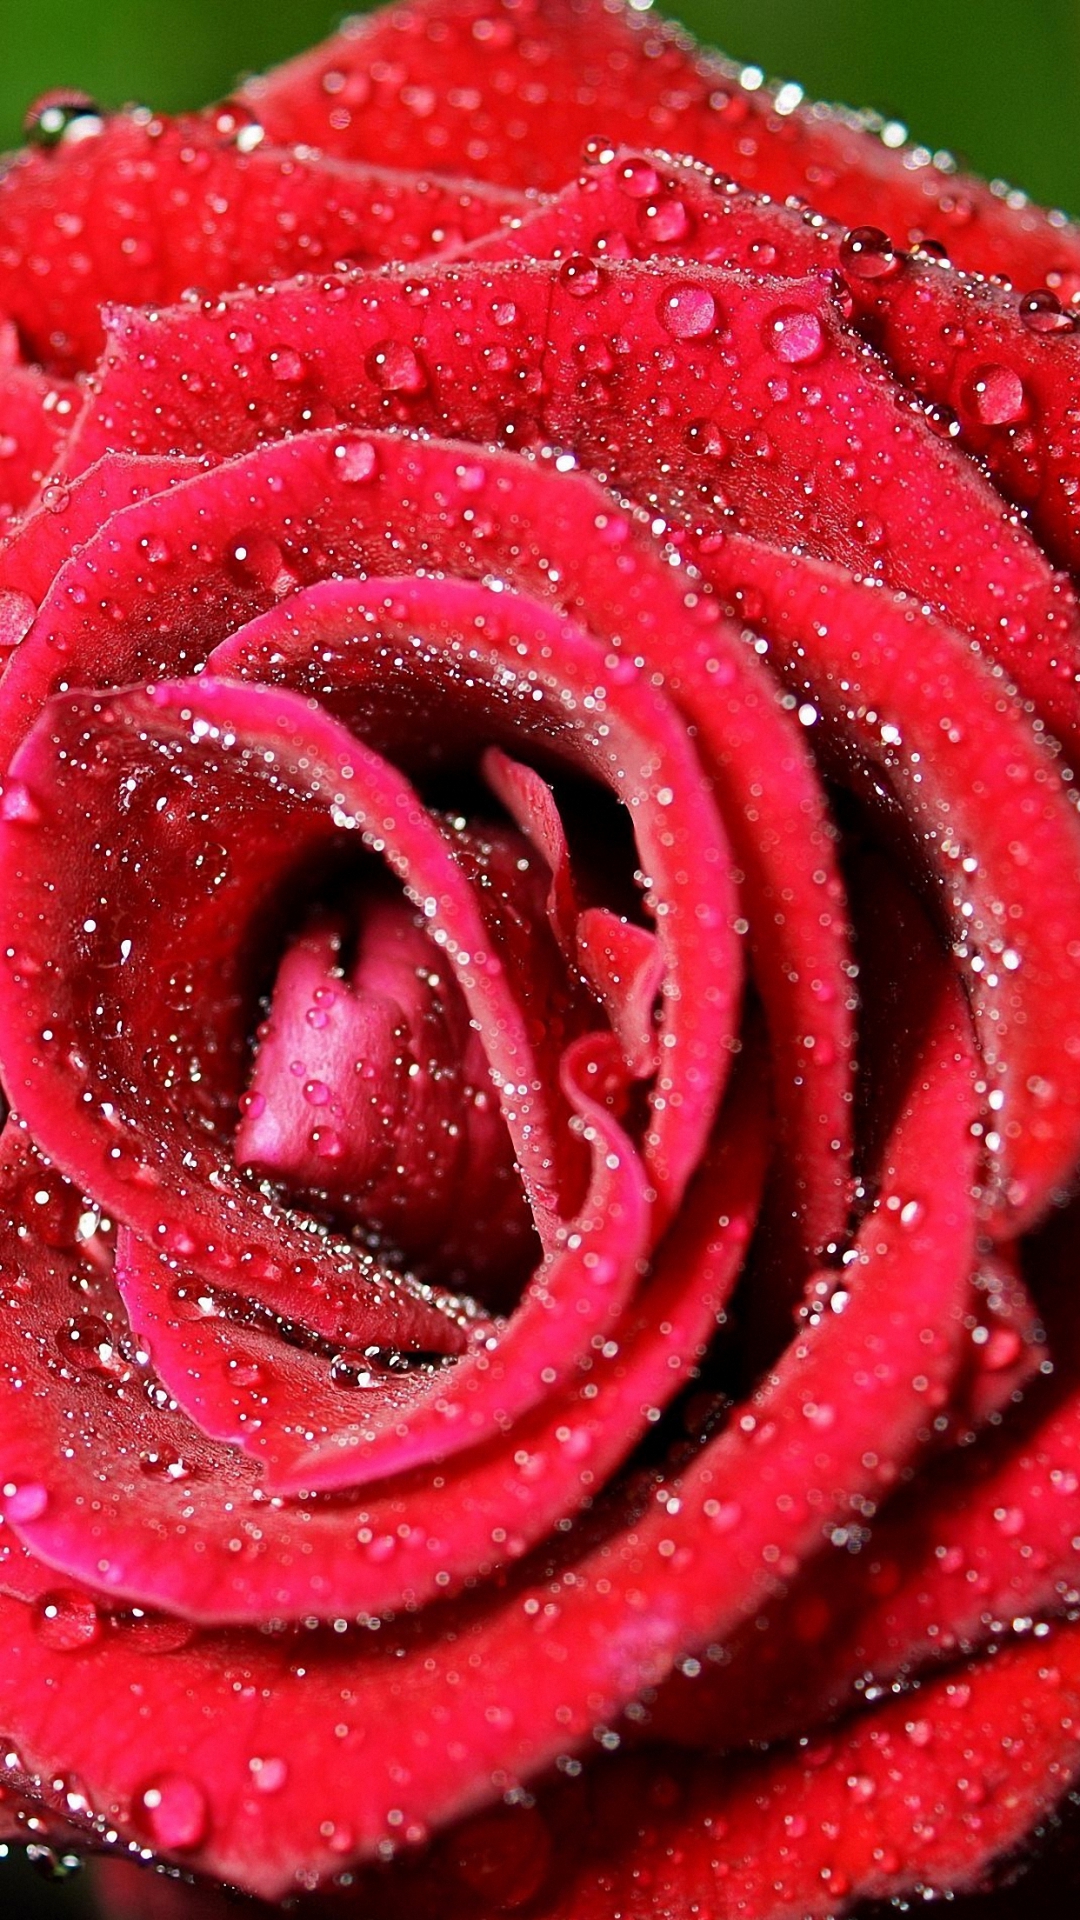 Beautiful Rose Flowers Hd Wallpapers For Mobile